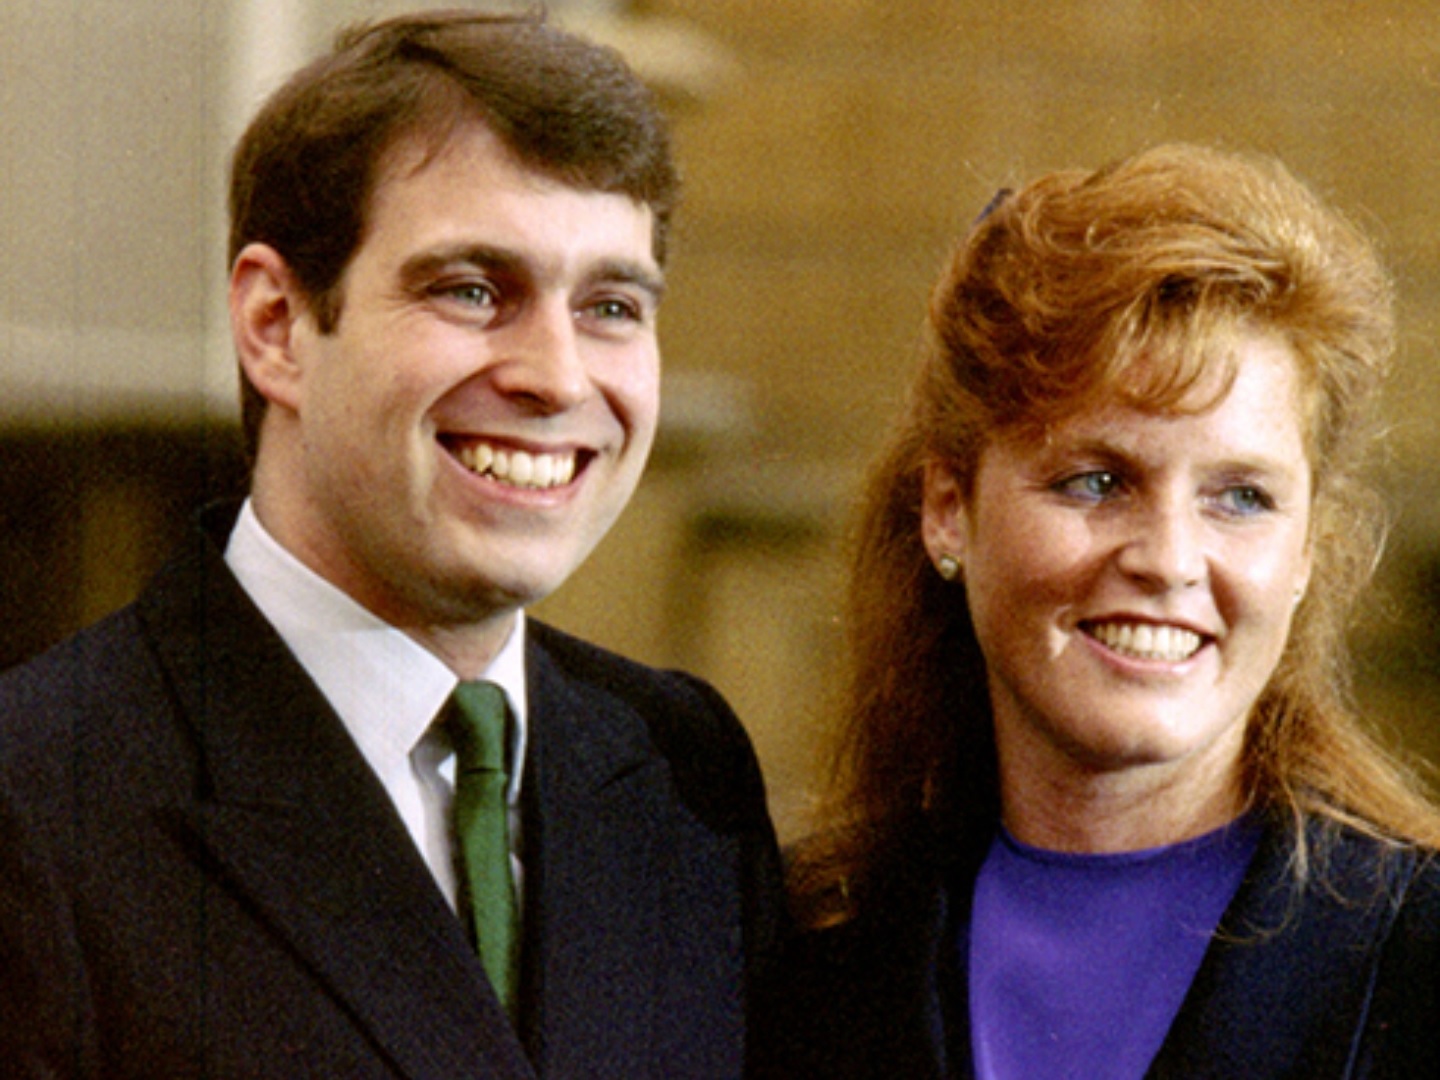 Sarah Ferguson opens up on her own funeral plans as she vows to break key tradition